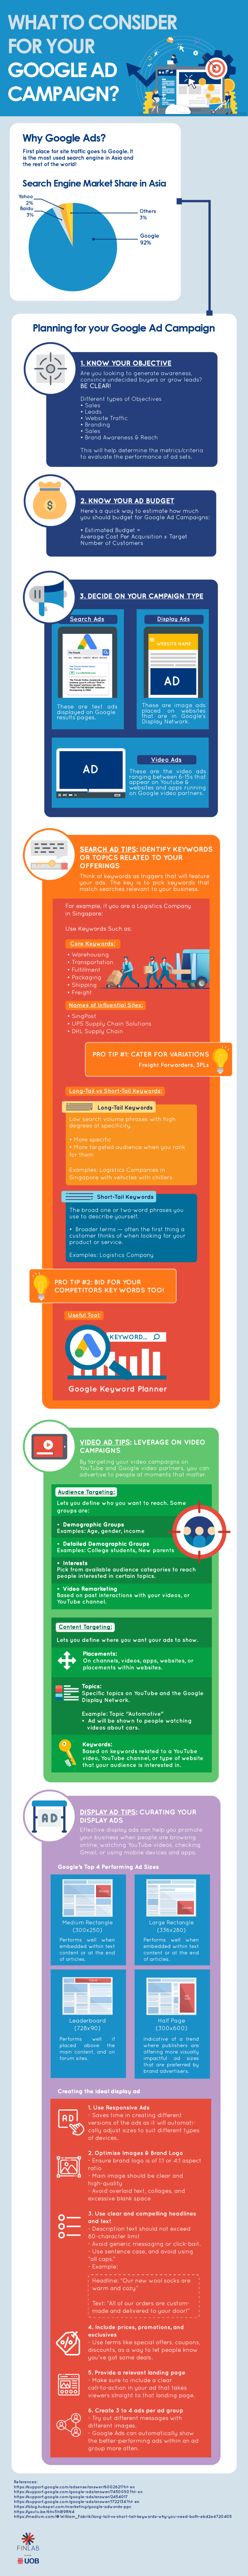 Seo Sem 3 Infographic Test 01 768X7976 1 - What To Consider For Your Google Ads Campaign